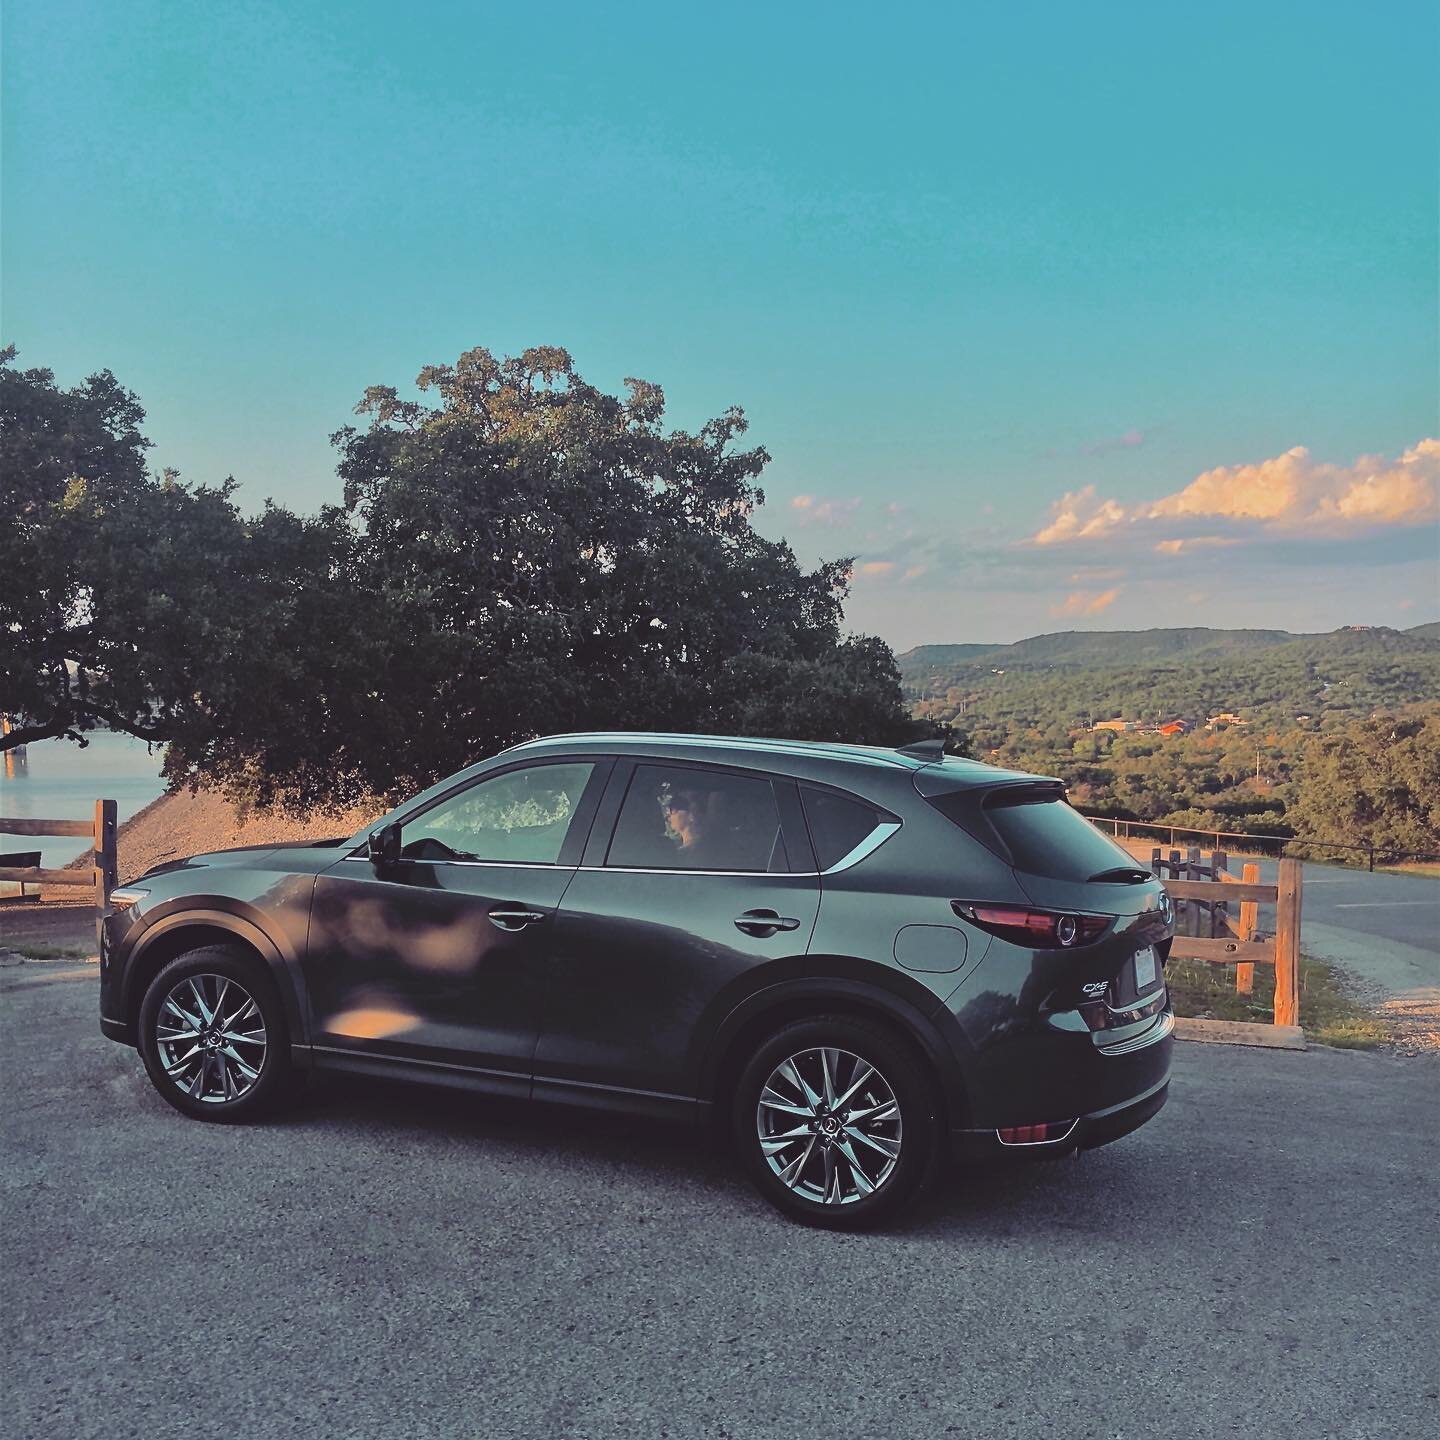 It&rsquo;s been a month 🎈and I am in love with my new babe in Machine Gray. 🥰 🤪

#Mazda #cx5 #signature #turbo #cx5signature #TravelWithMe #withmazda #luxury #travel #awd #drive4good #mazdamovement #mazdaspeed #suv #carlivestyle